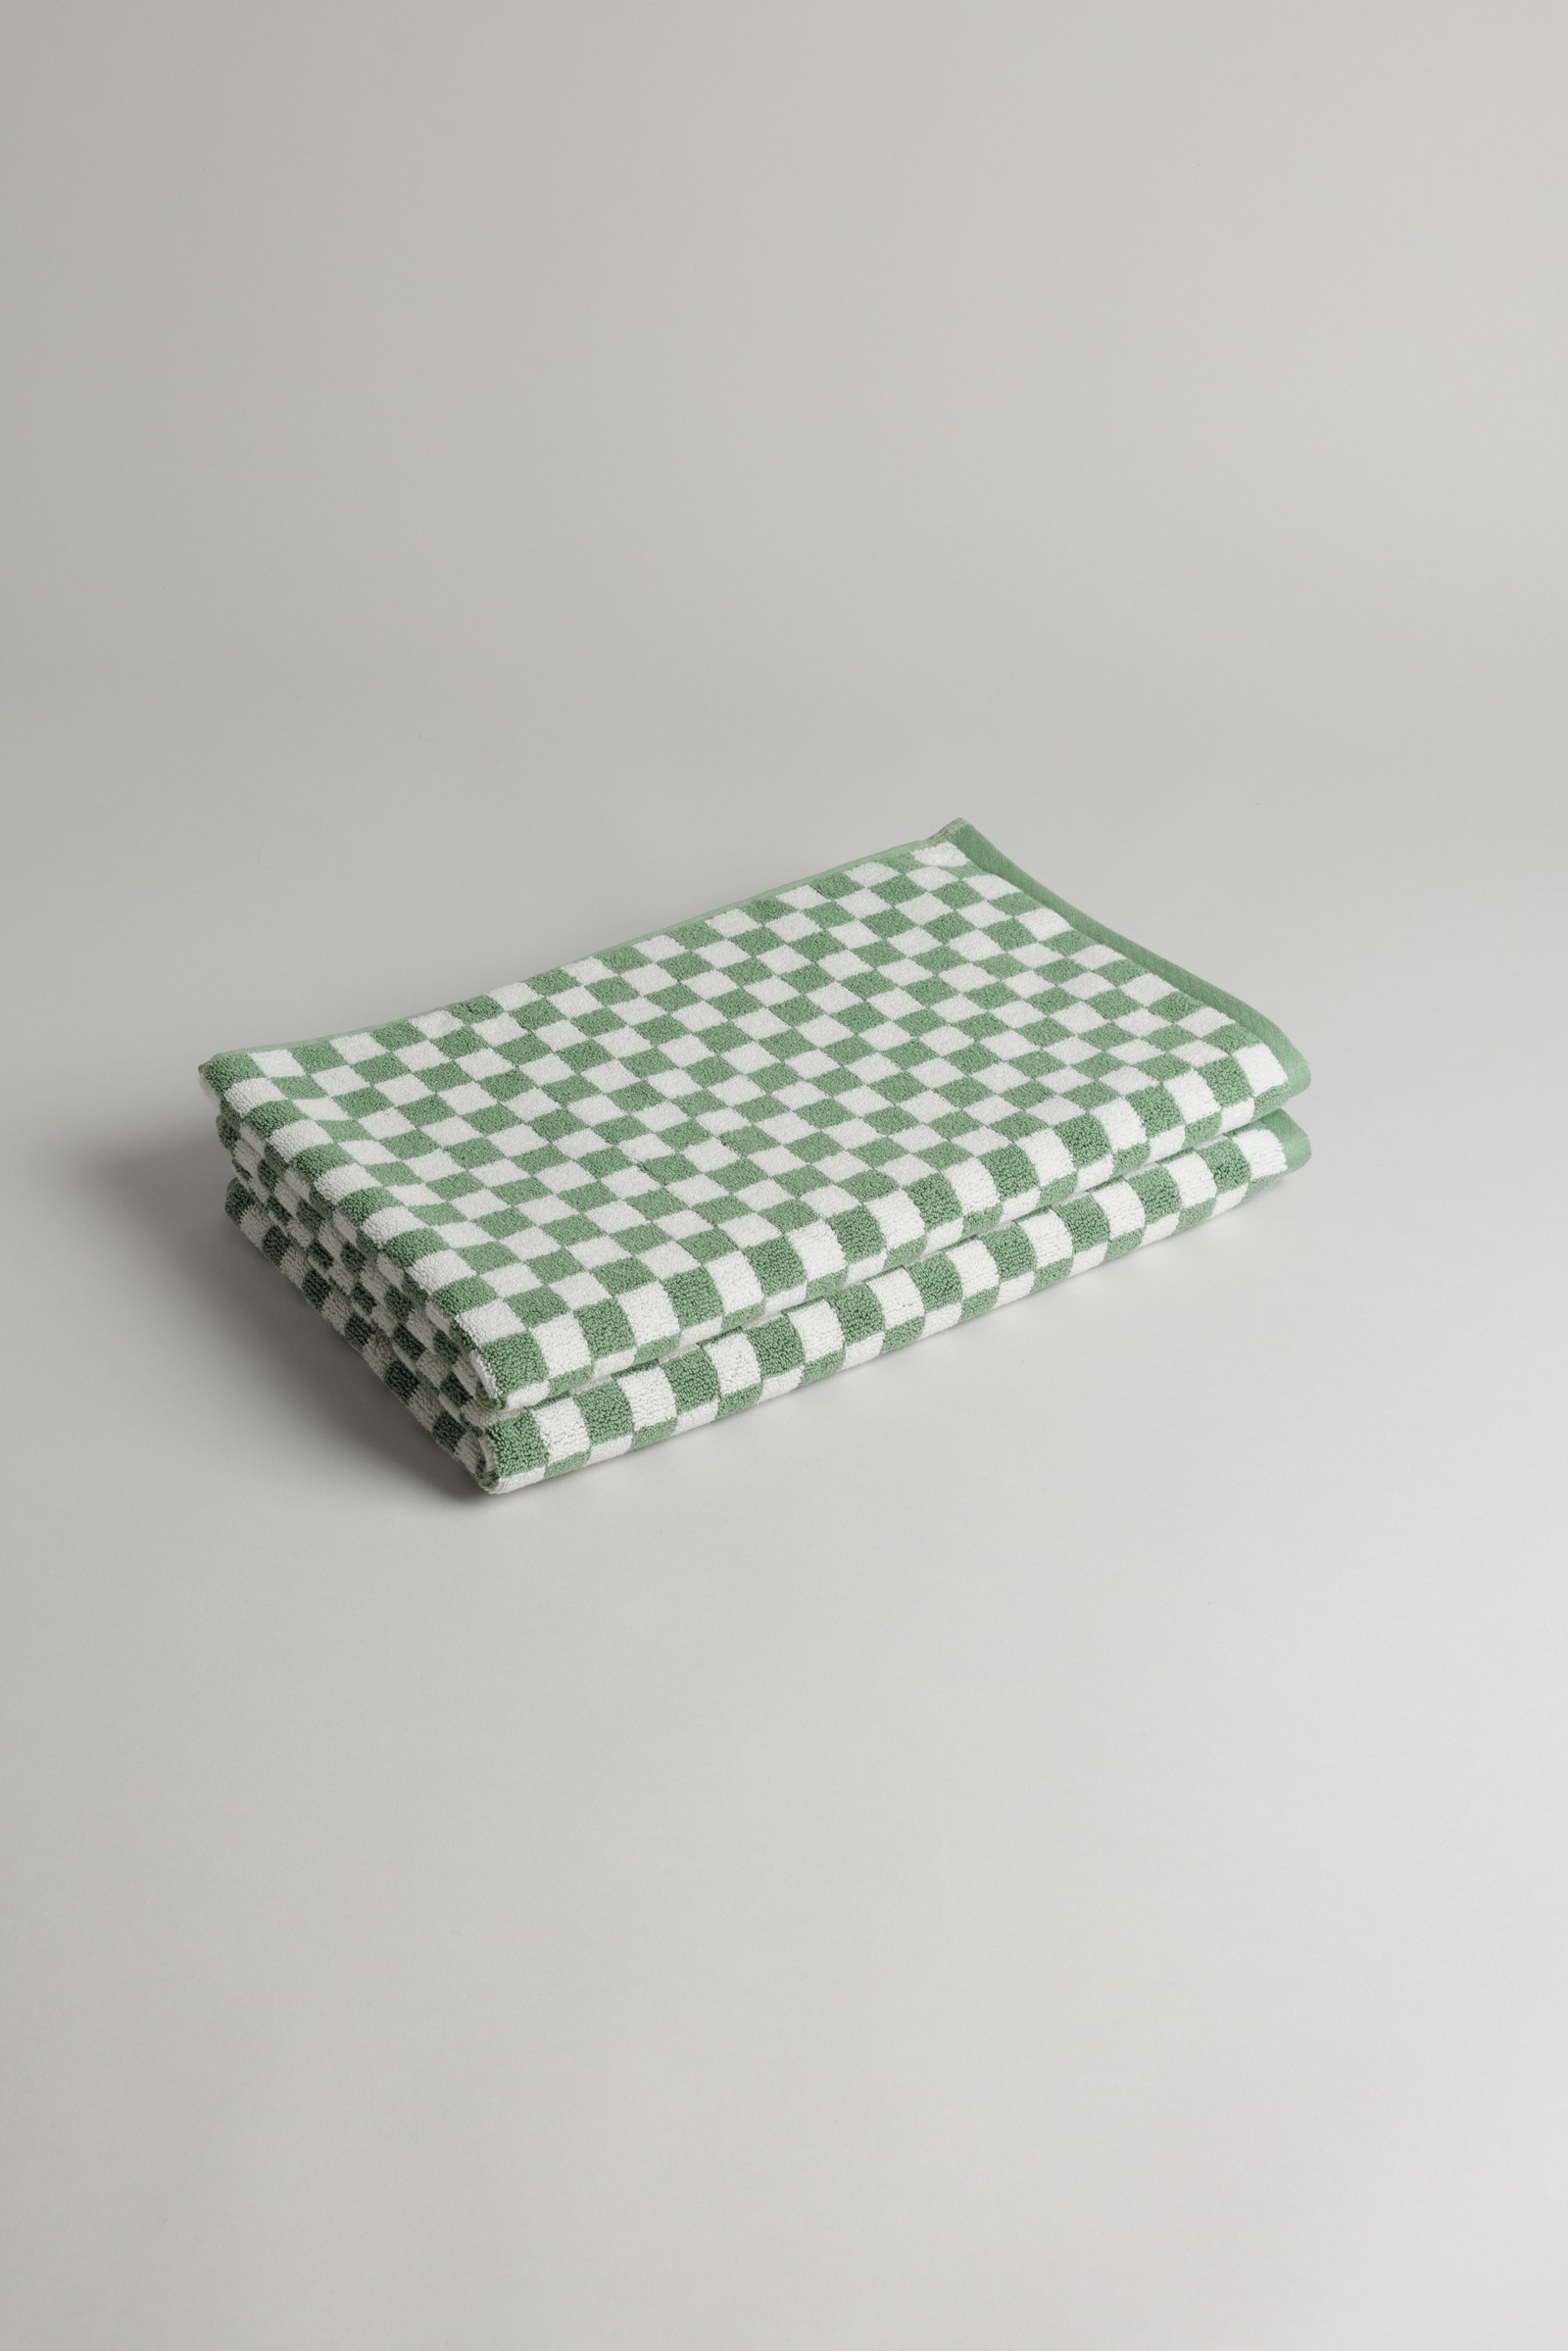 a green and white checkered napkin on a white surface